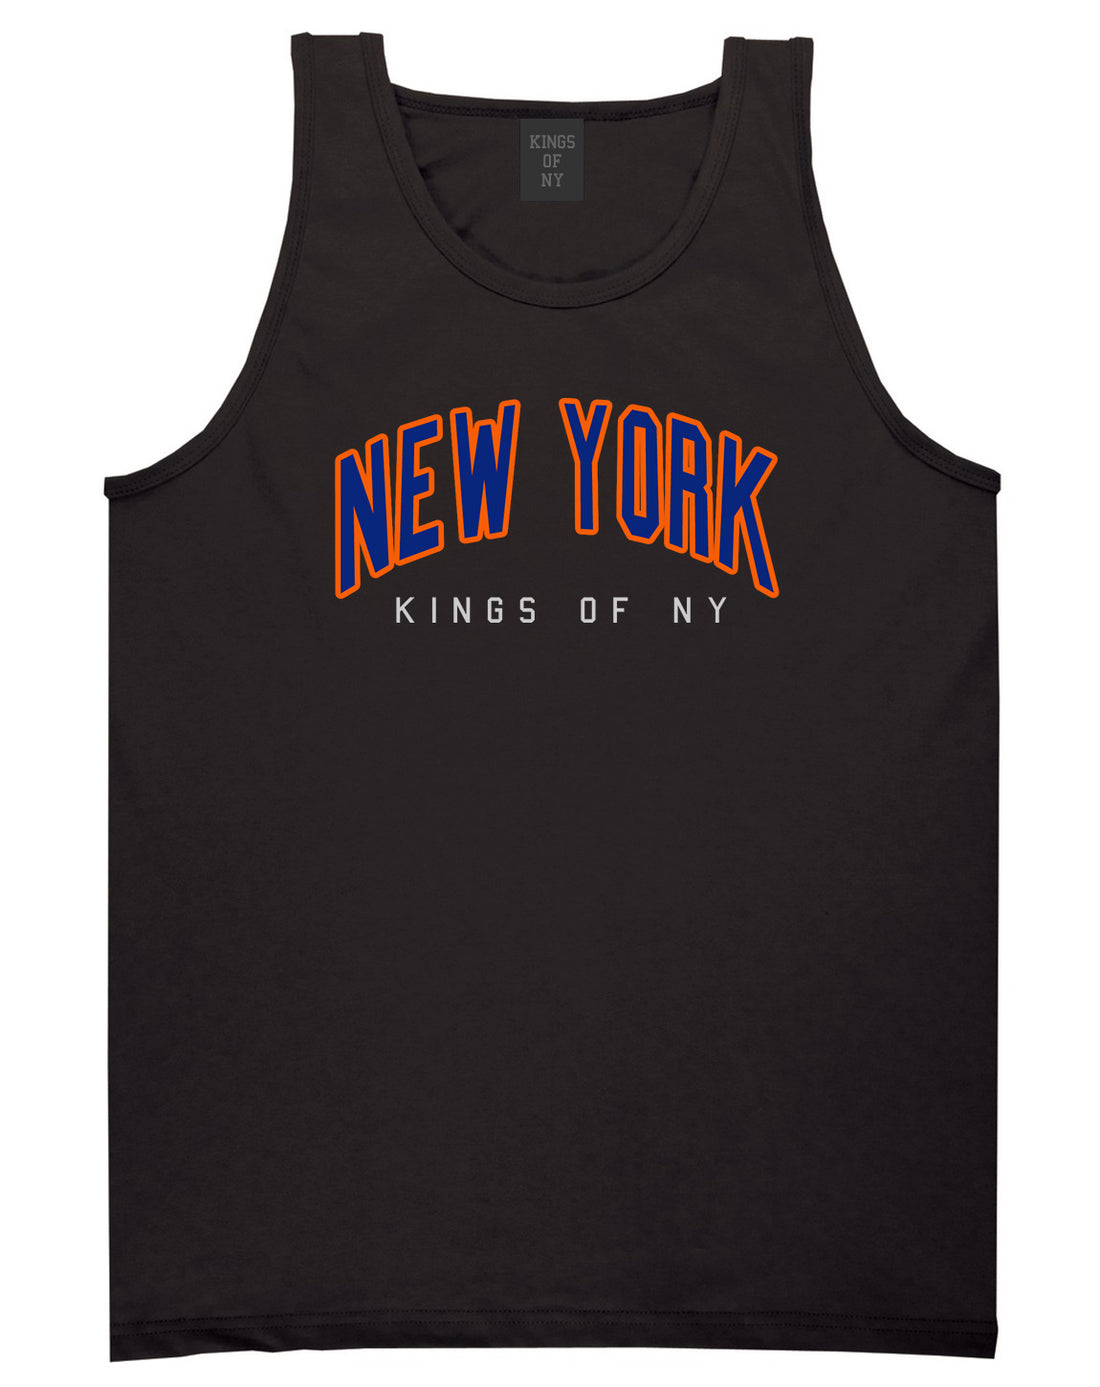 New York Blue And Orange Mens Tank Top Shirt Black by Kings Of NY